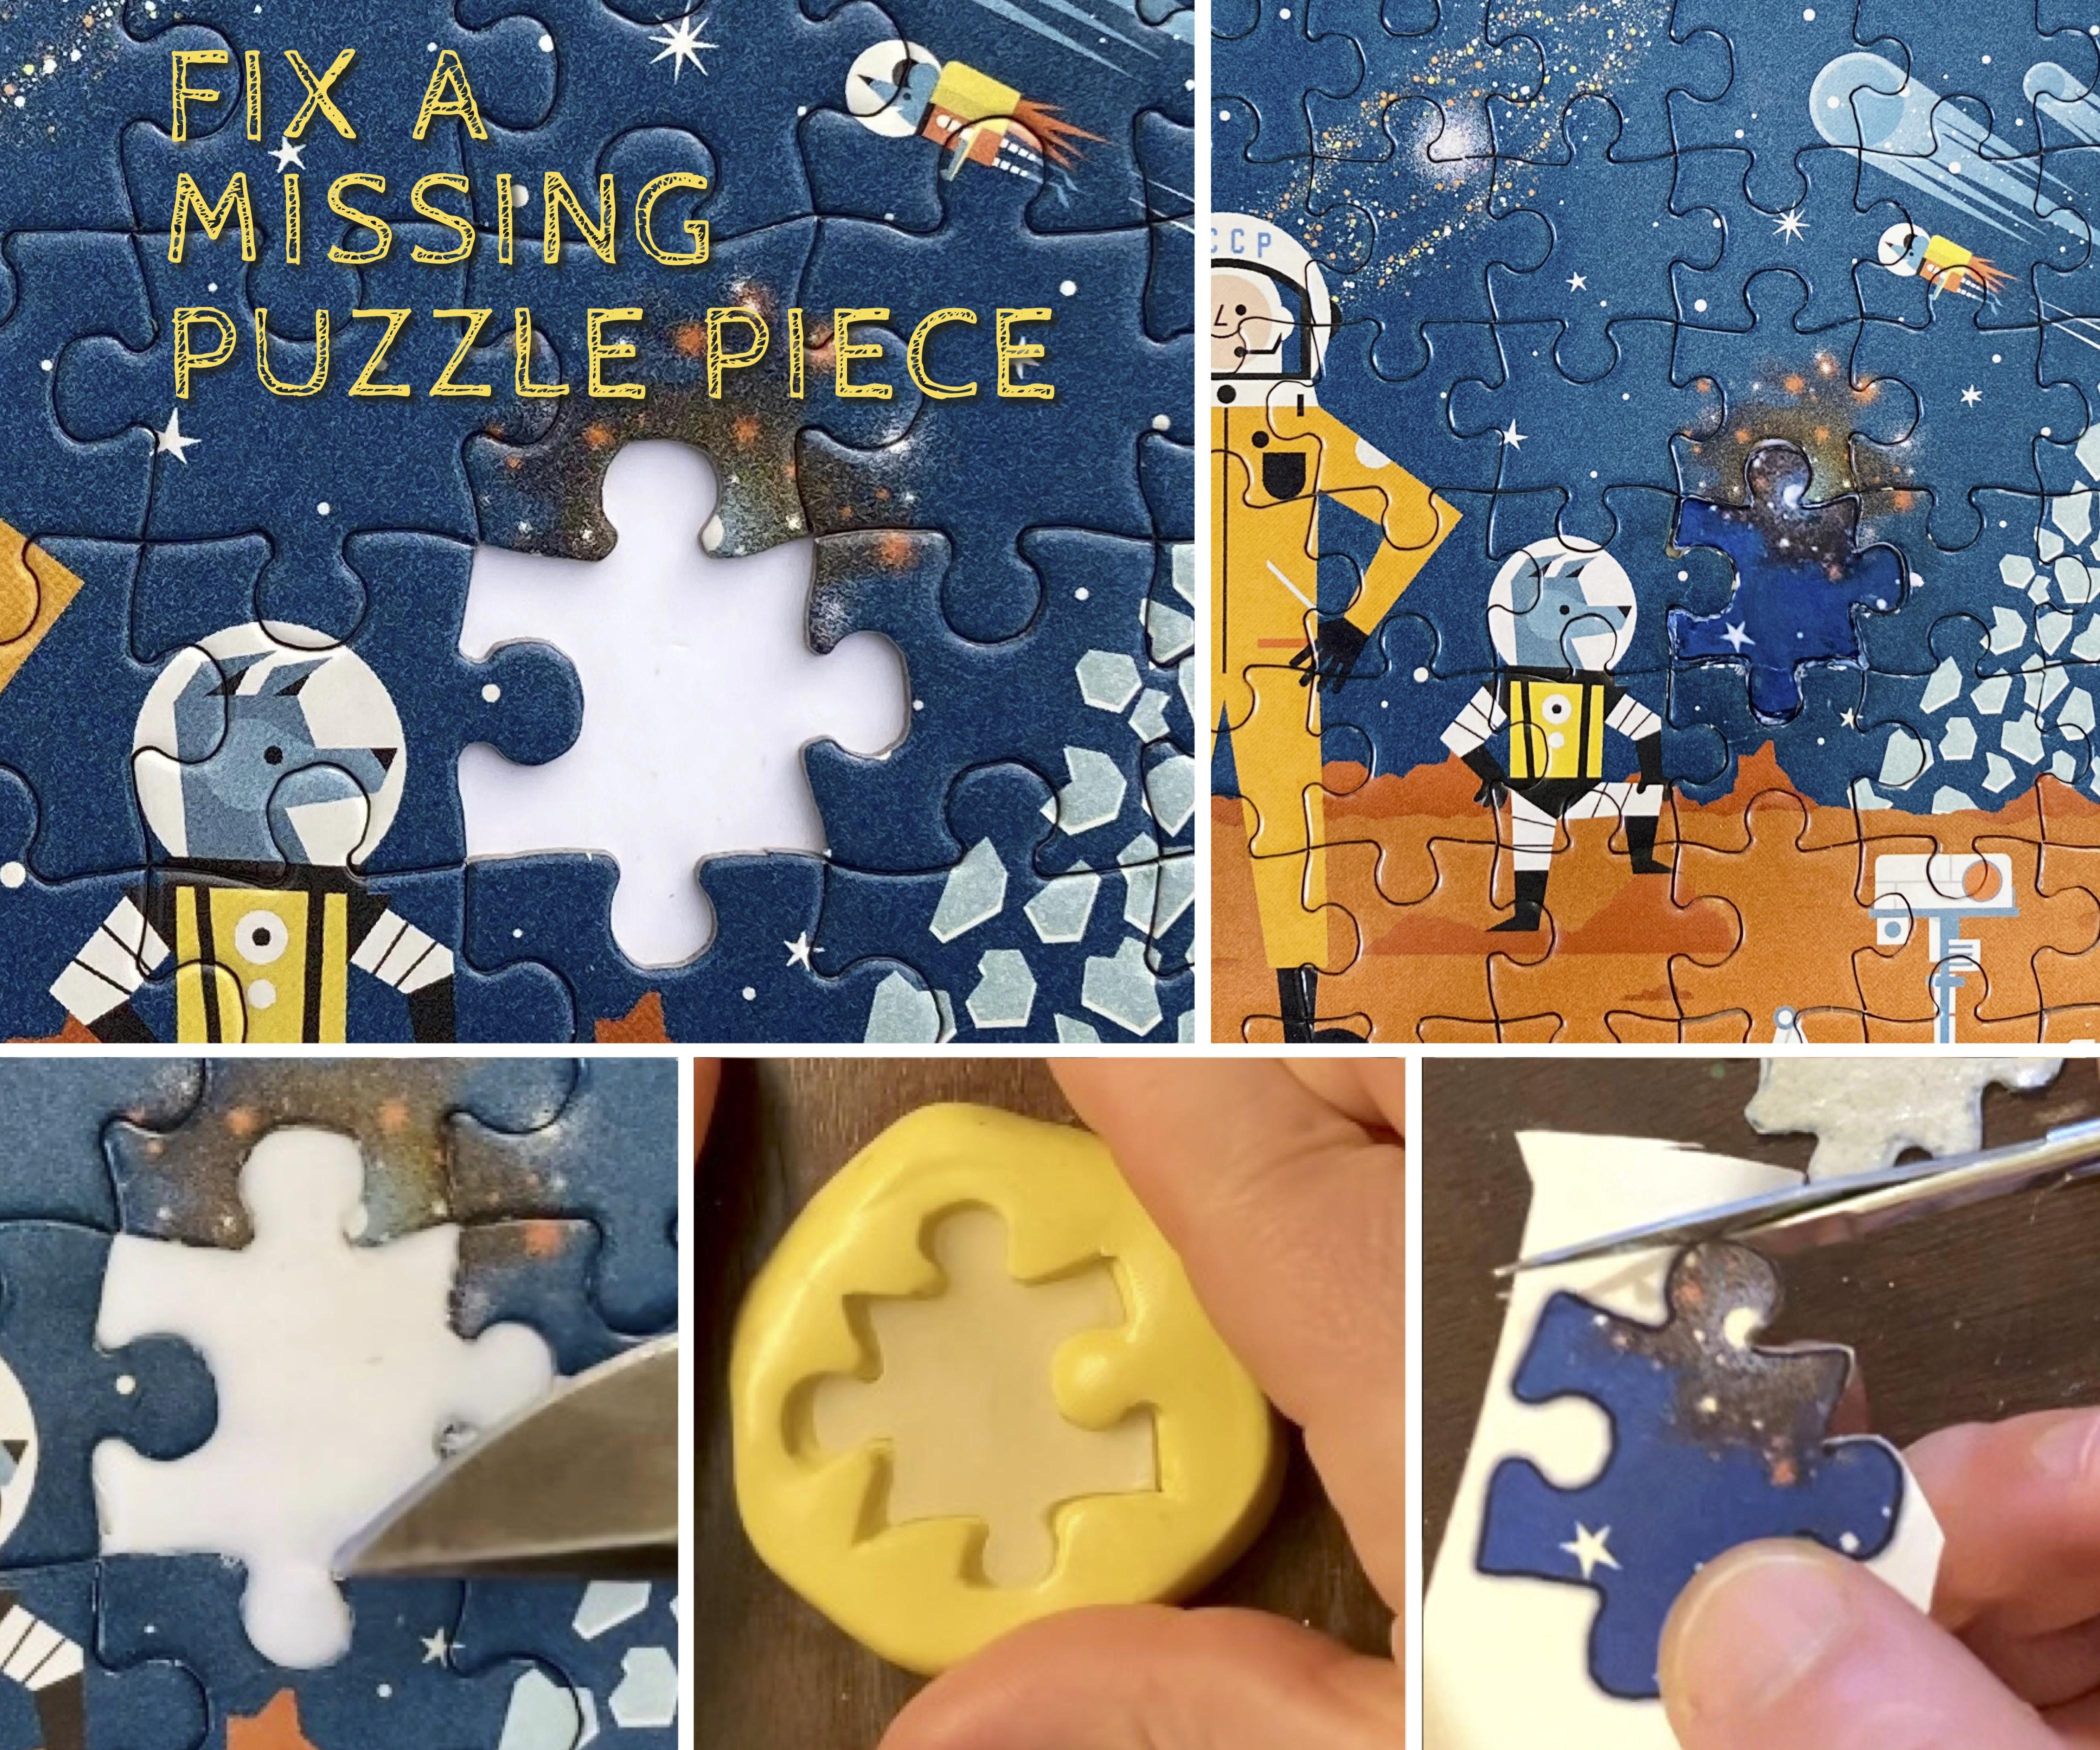 Re-Create a Missing Puzzle Piece